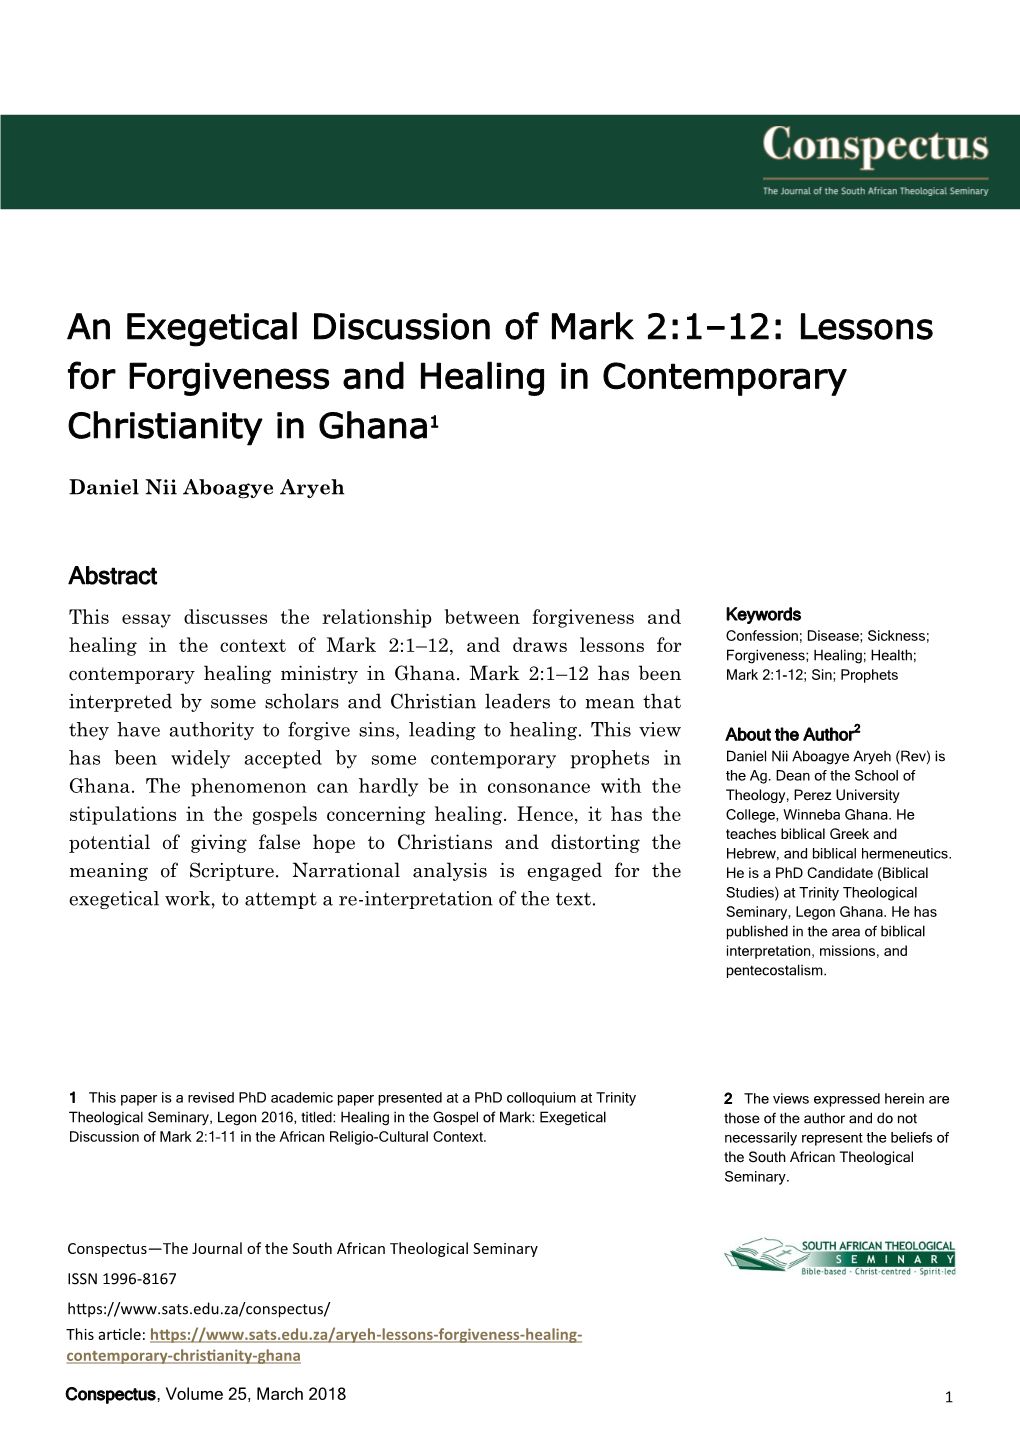 An Exegetical Discussion of Mark 2:1–12: Lessons for Forgiveness and Healing in Contemporary Christianity in Ghana1